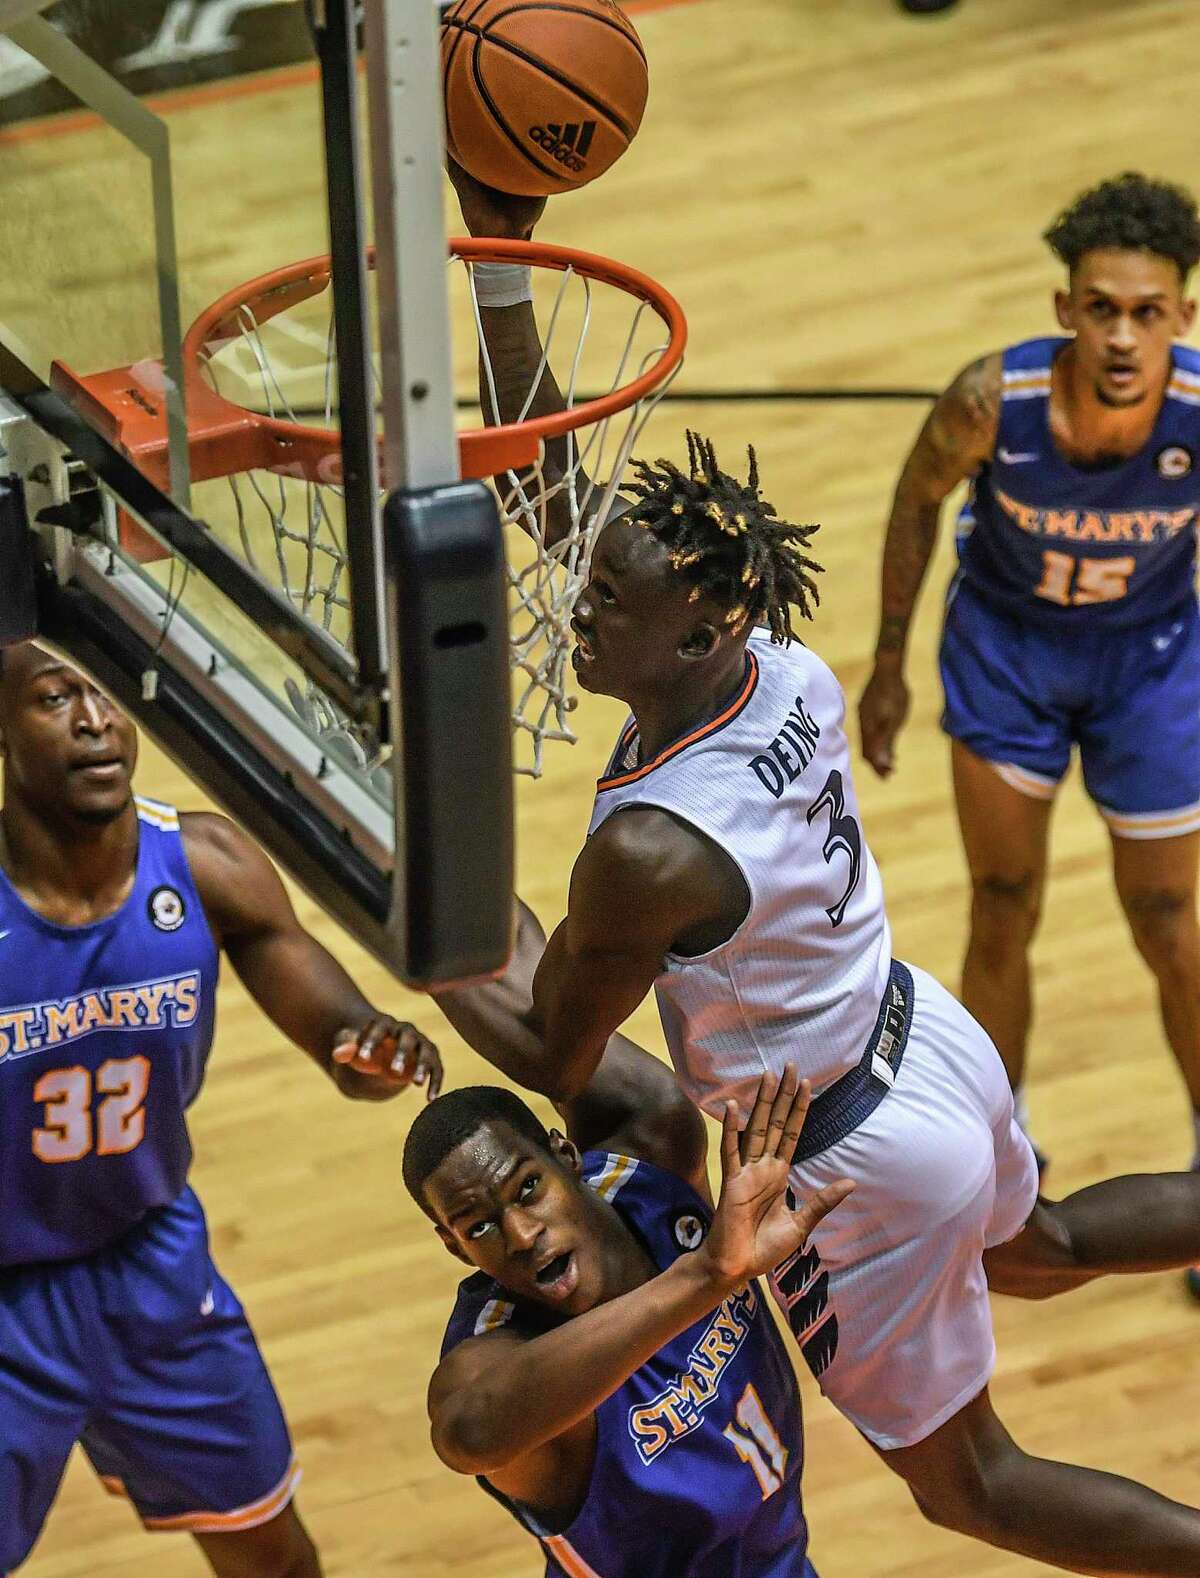 UTSA’S Dhieu Deing (3) drives and scores over Mamady Djikine of St. Mary’s during college basketball action at the UTSA Convocation Center on Monday, Nov. 29, 2021.